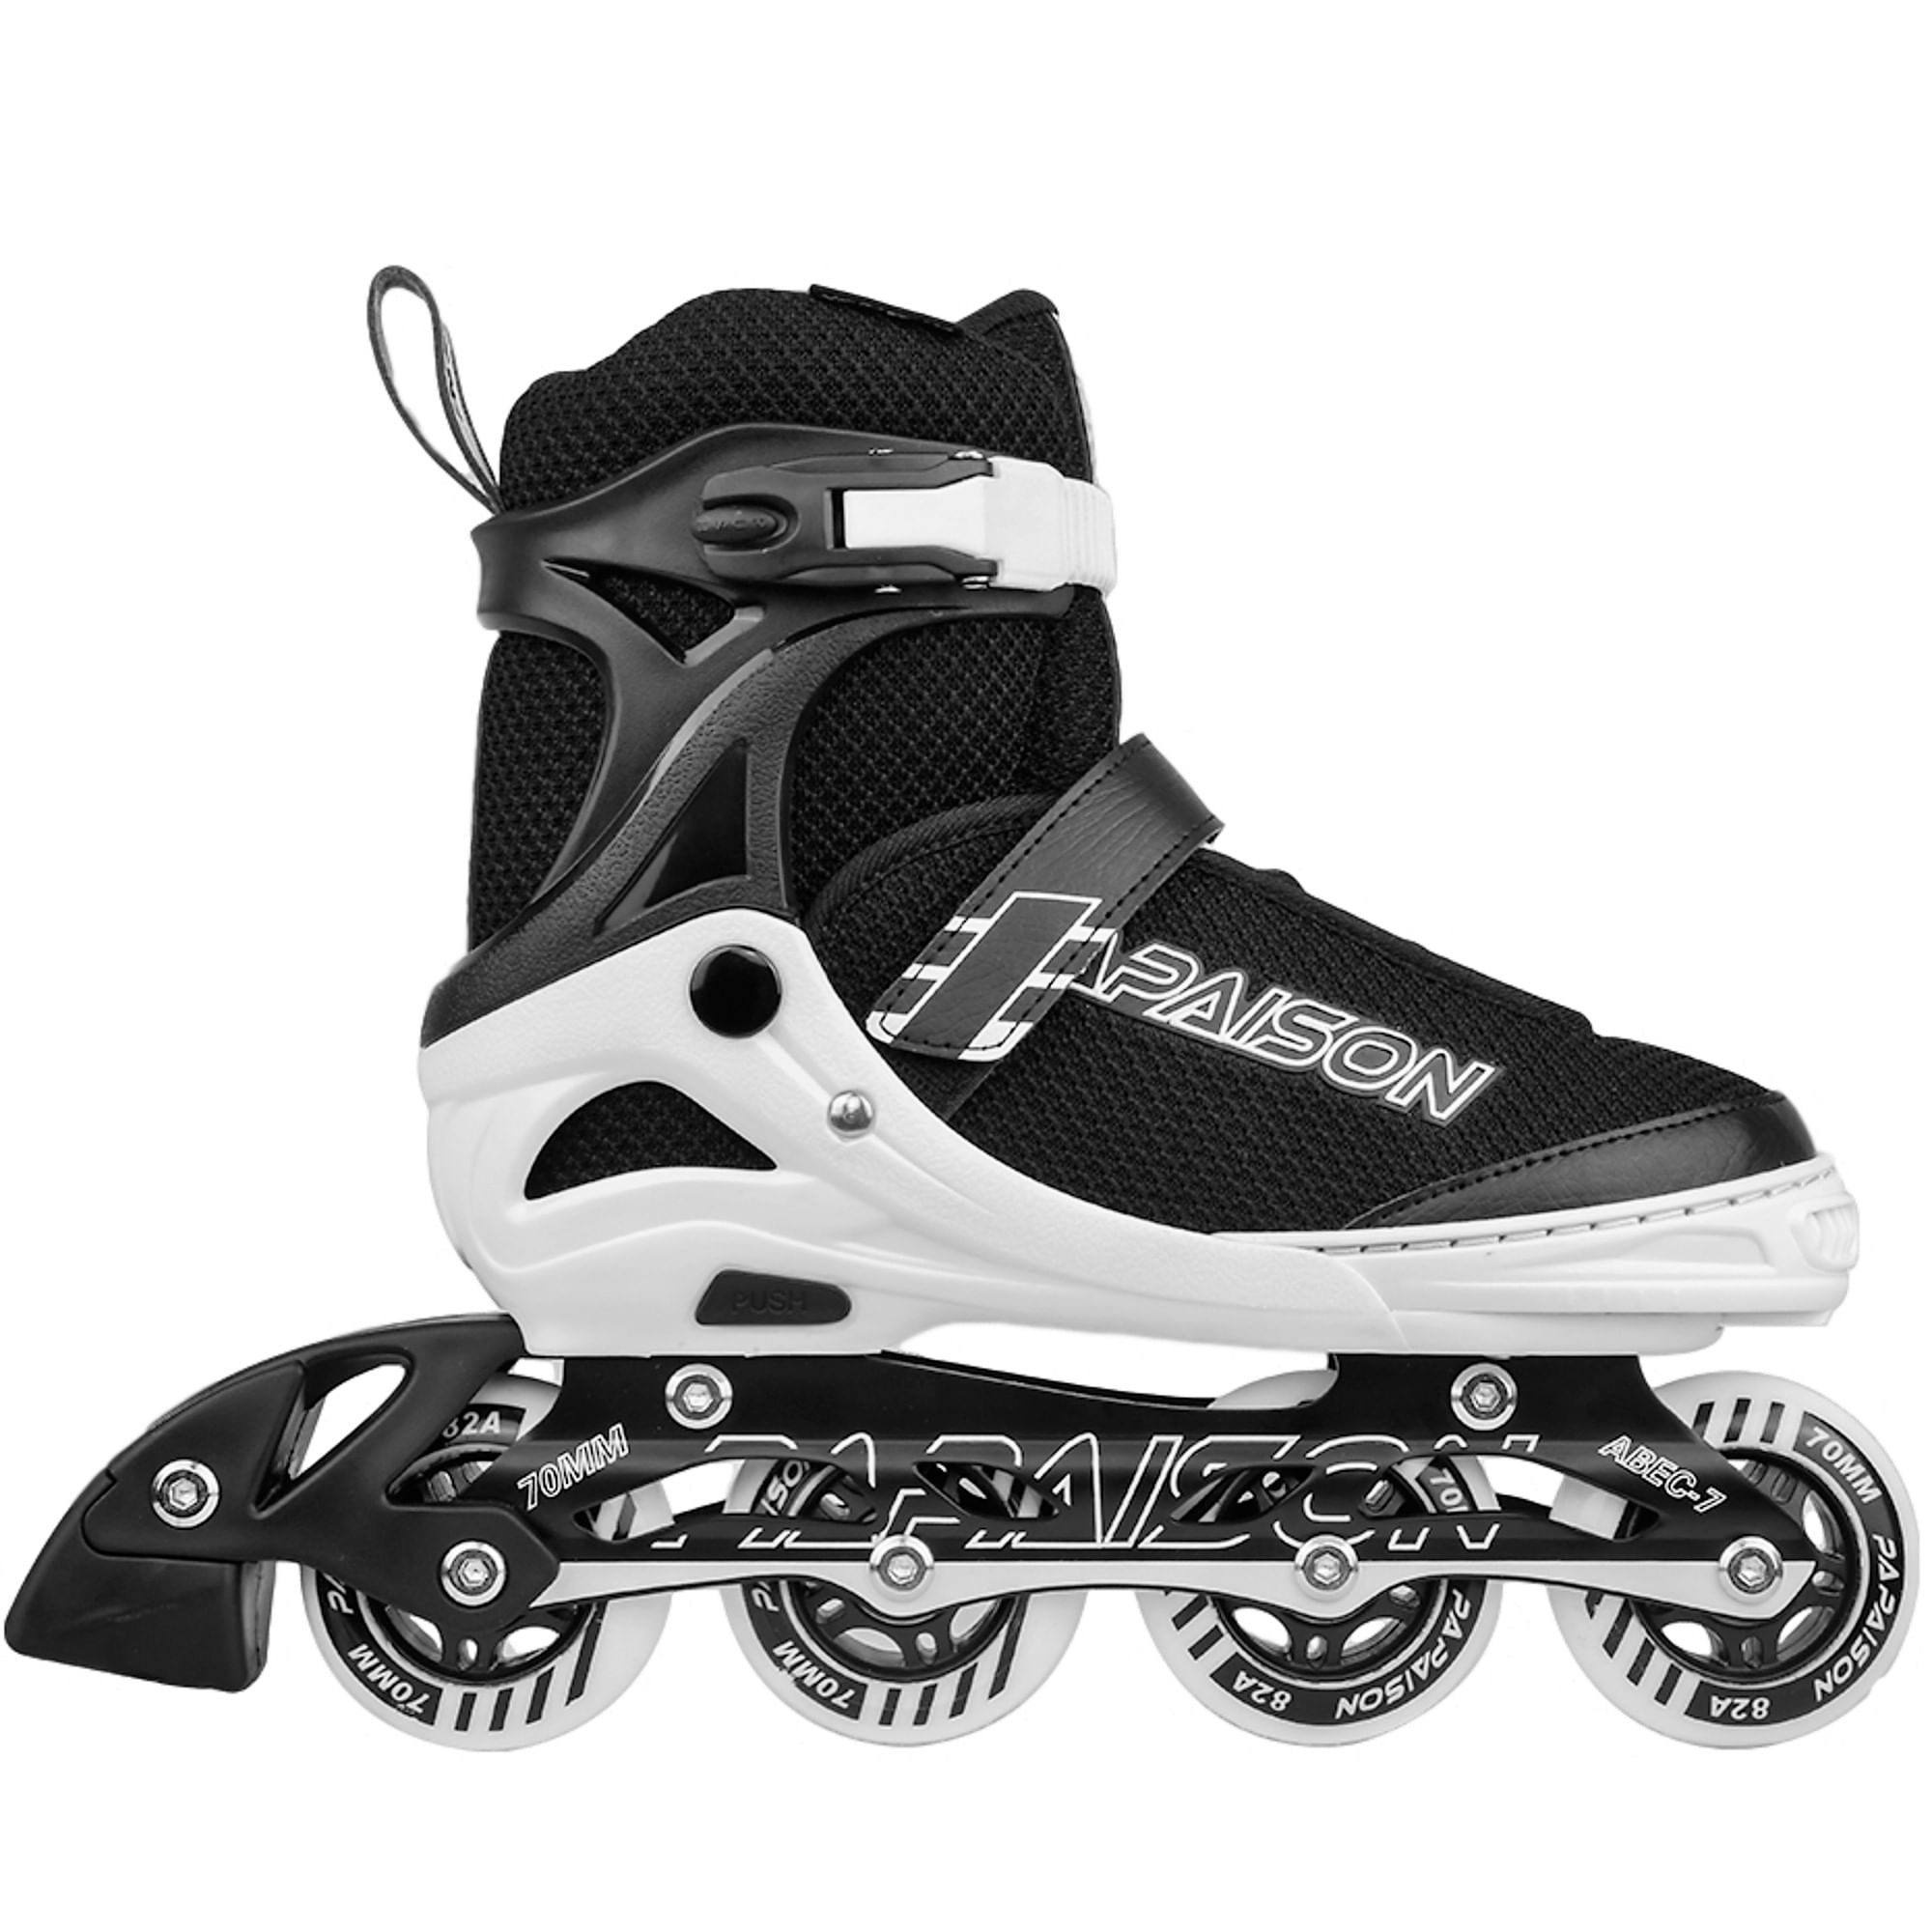 Patines Lineales Tallas 31-33 Papaison XZY-306 - Negro